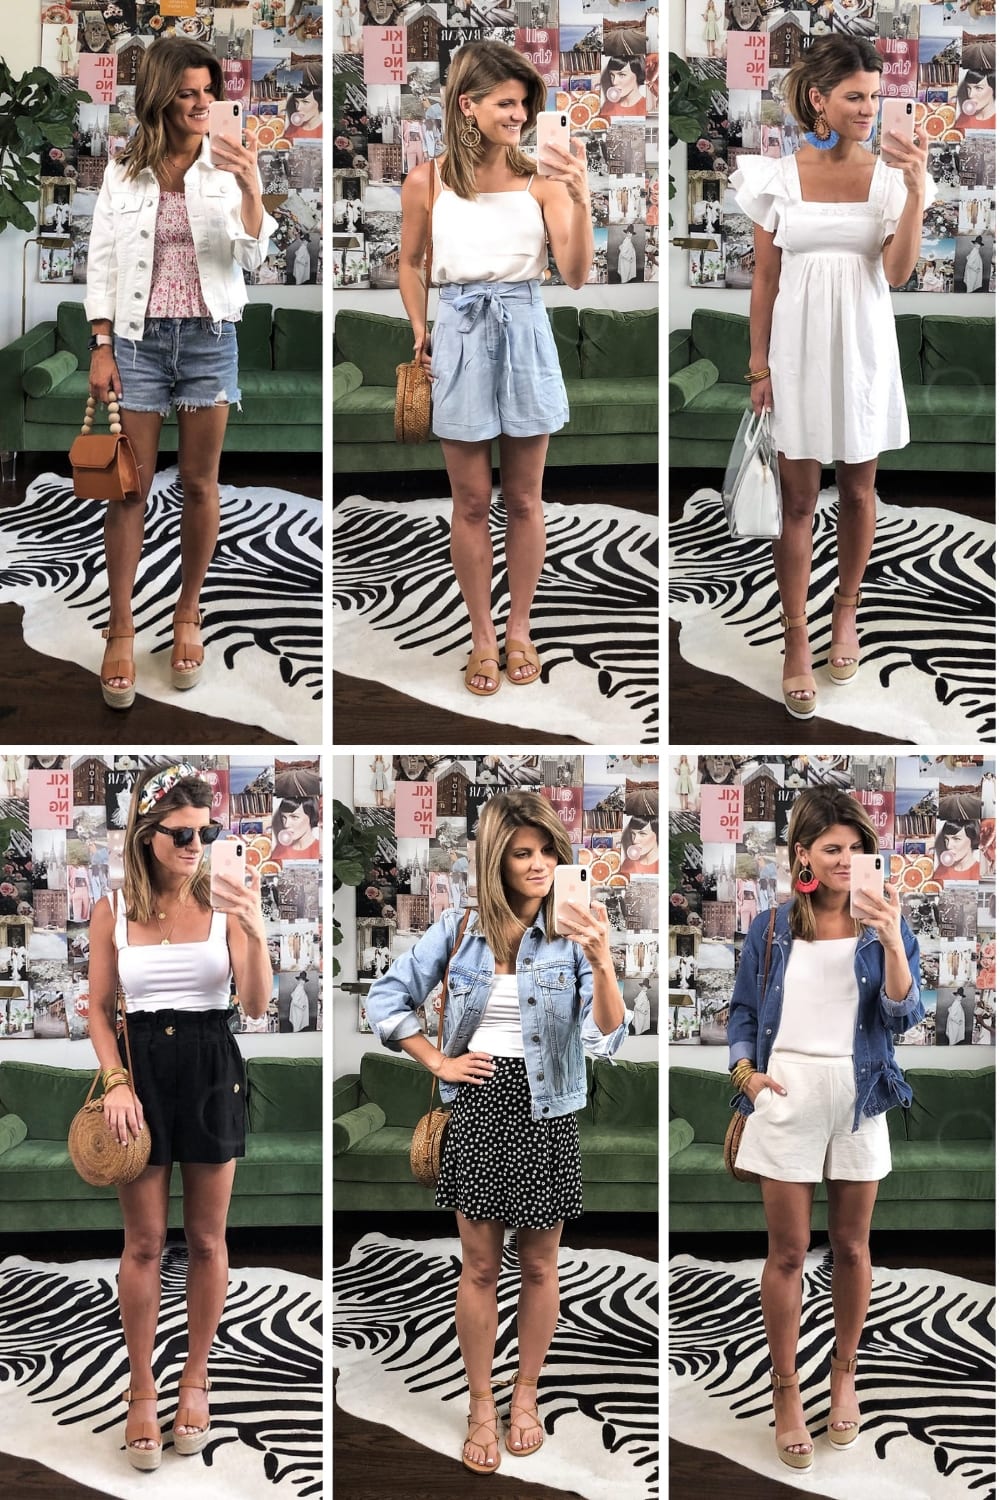 https://www.brightontheday.com/wp-content/uploads/2019/06/Summer-Outfits.jpg